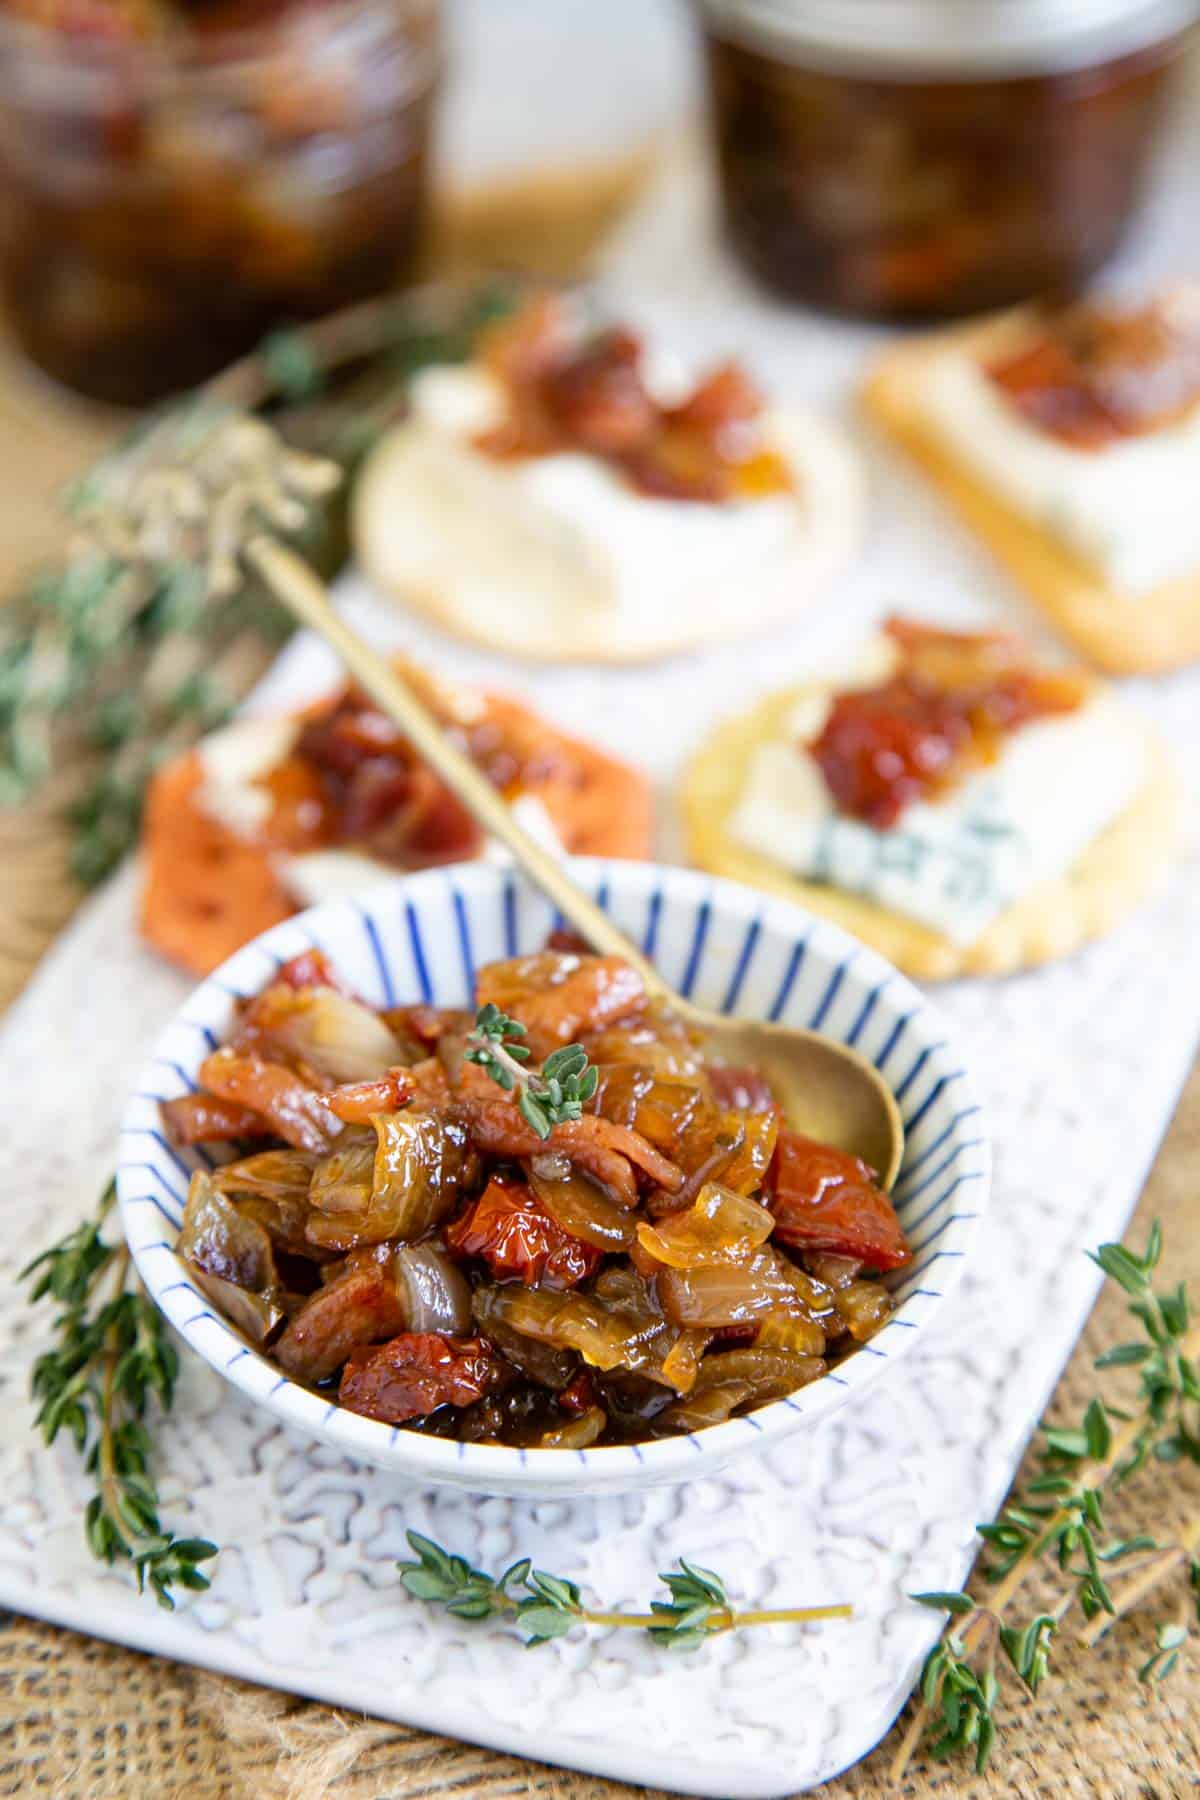 Tomato and bacon jam in a little blue and white bowl on an stylish cheeseboard with cheese and crackers - a little goes a long way!